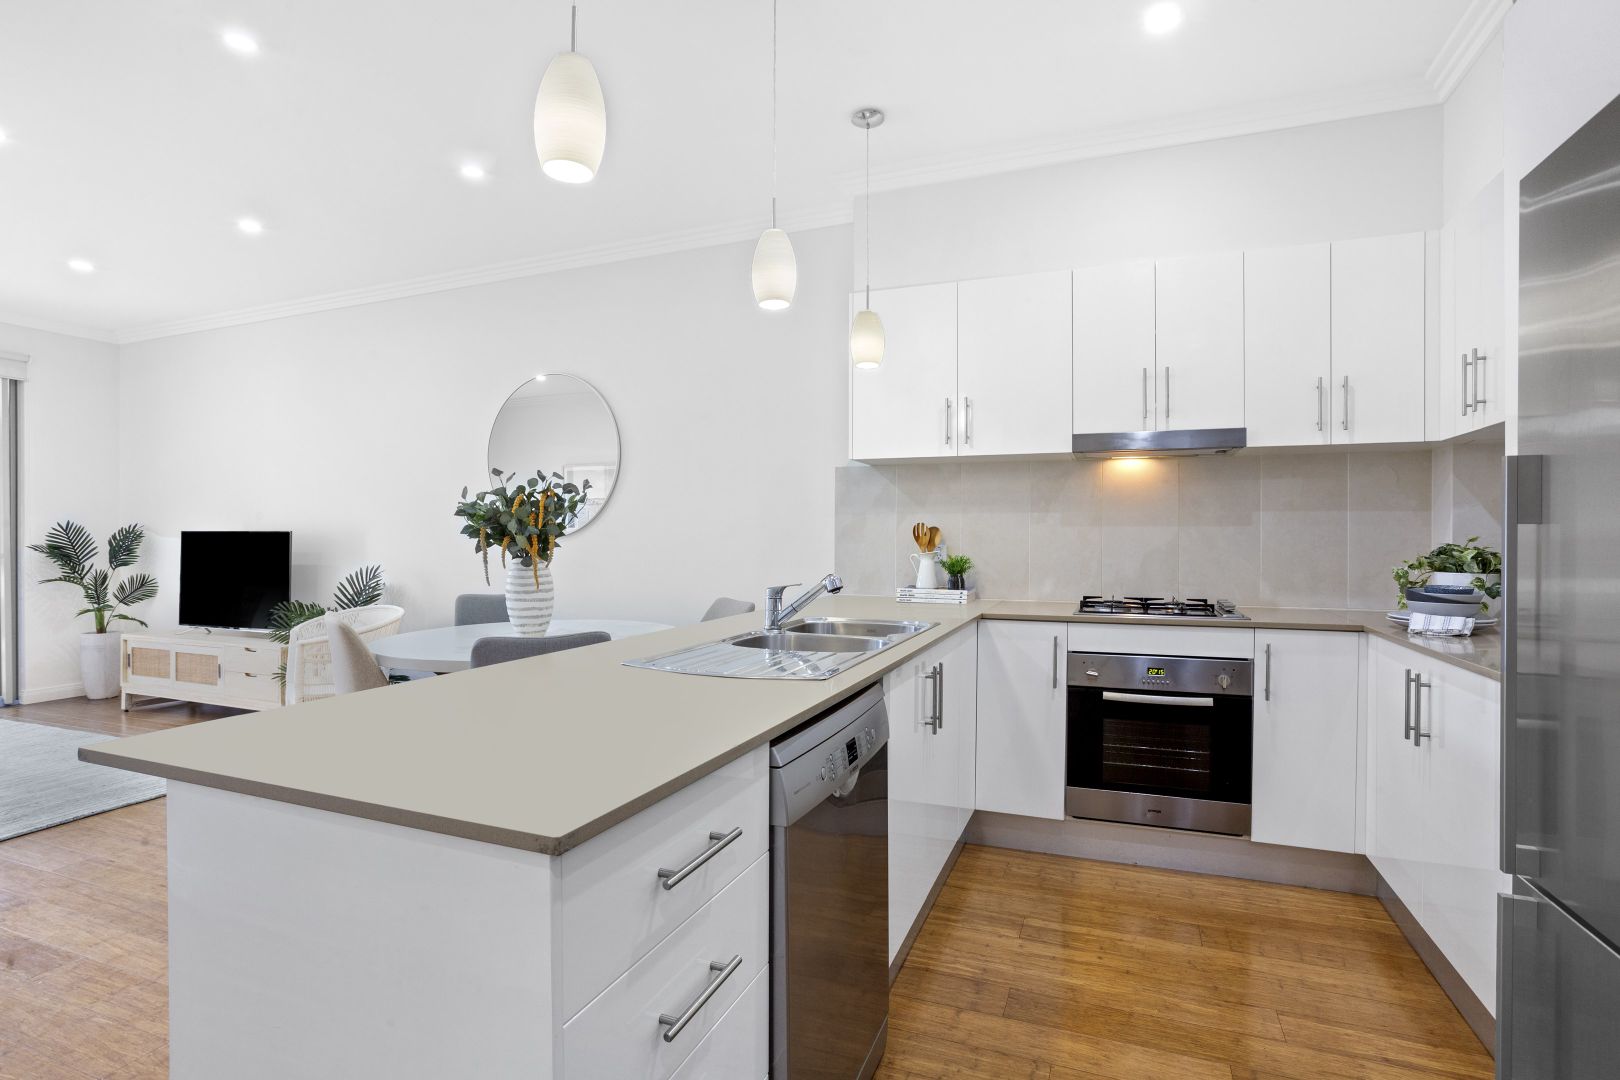 43/41 Roseberry Street, Manly Vale NSW 2093, Image 1